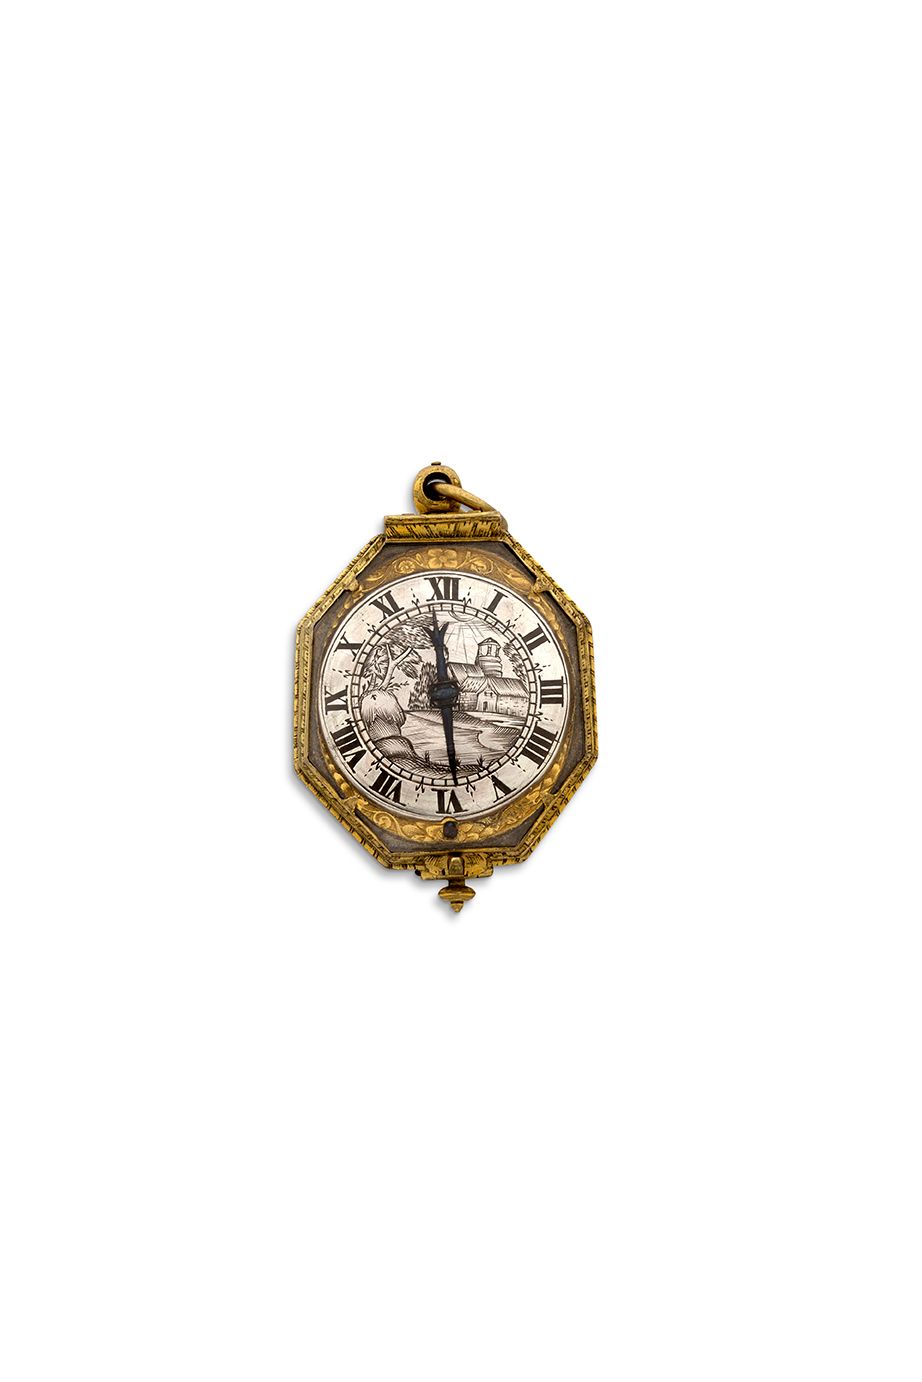 E STIENNE HUBERT, Rouen 
Octagonal watch in gilded metal and rock crystal with a&hellip;